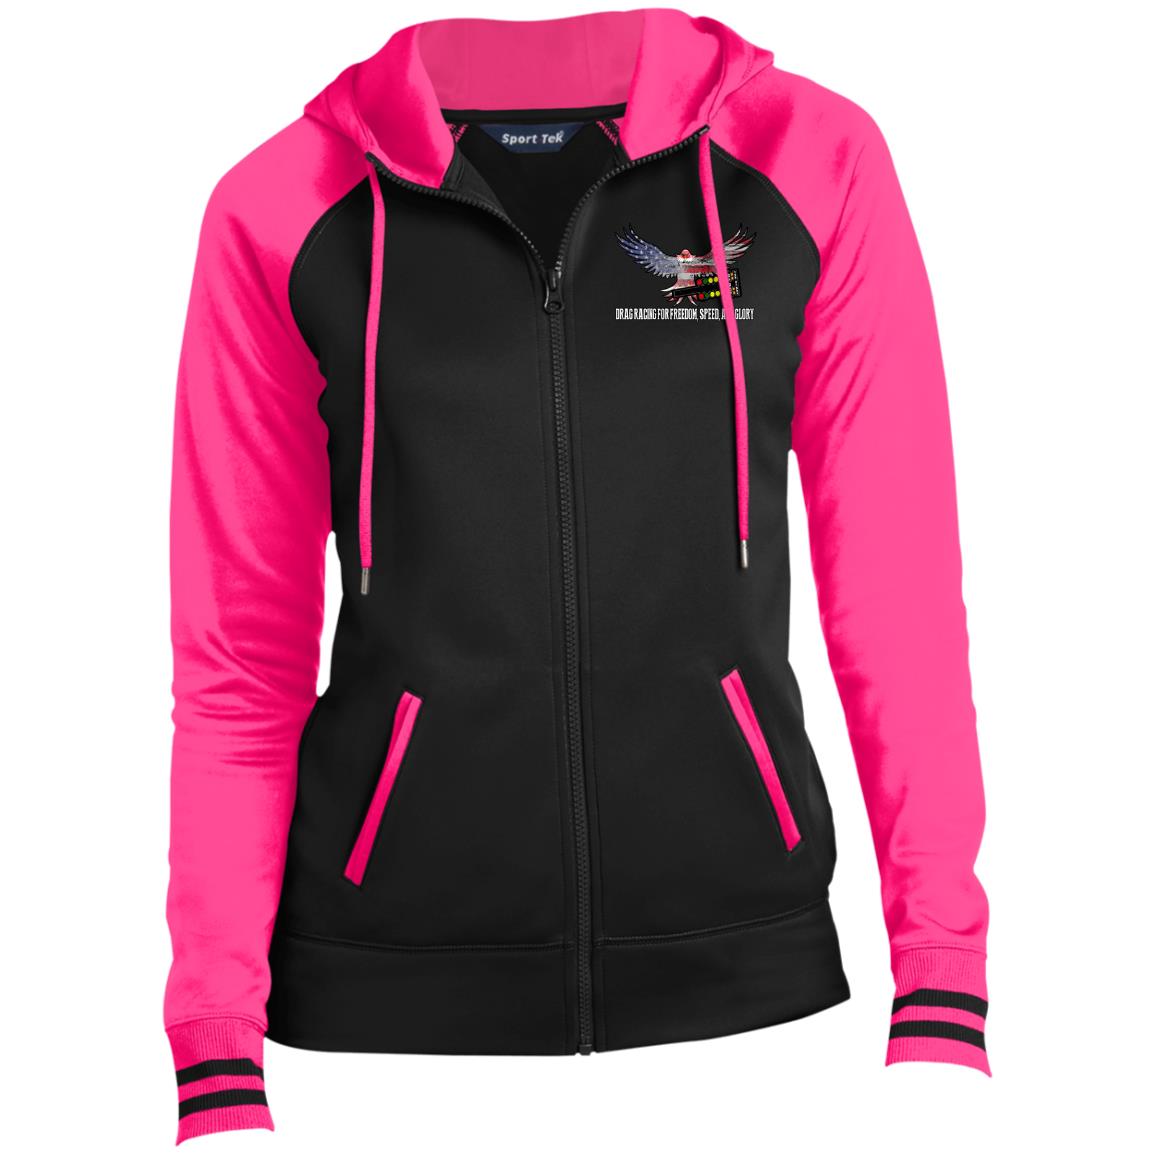 Drag Racing for Freedom, Speed, and Glory Ladies' Sport-Wick® Full-Zip Hooded Jacket